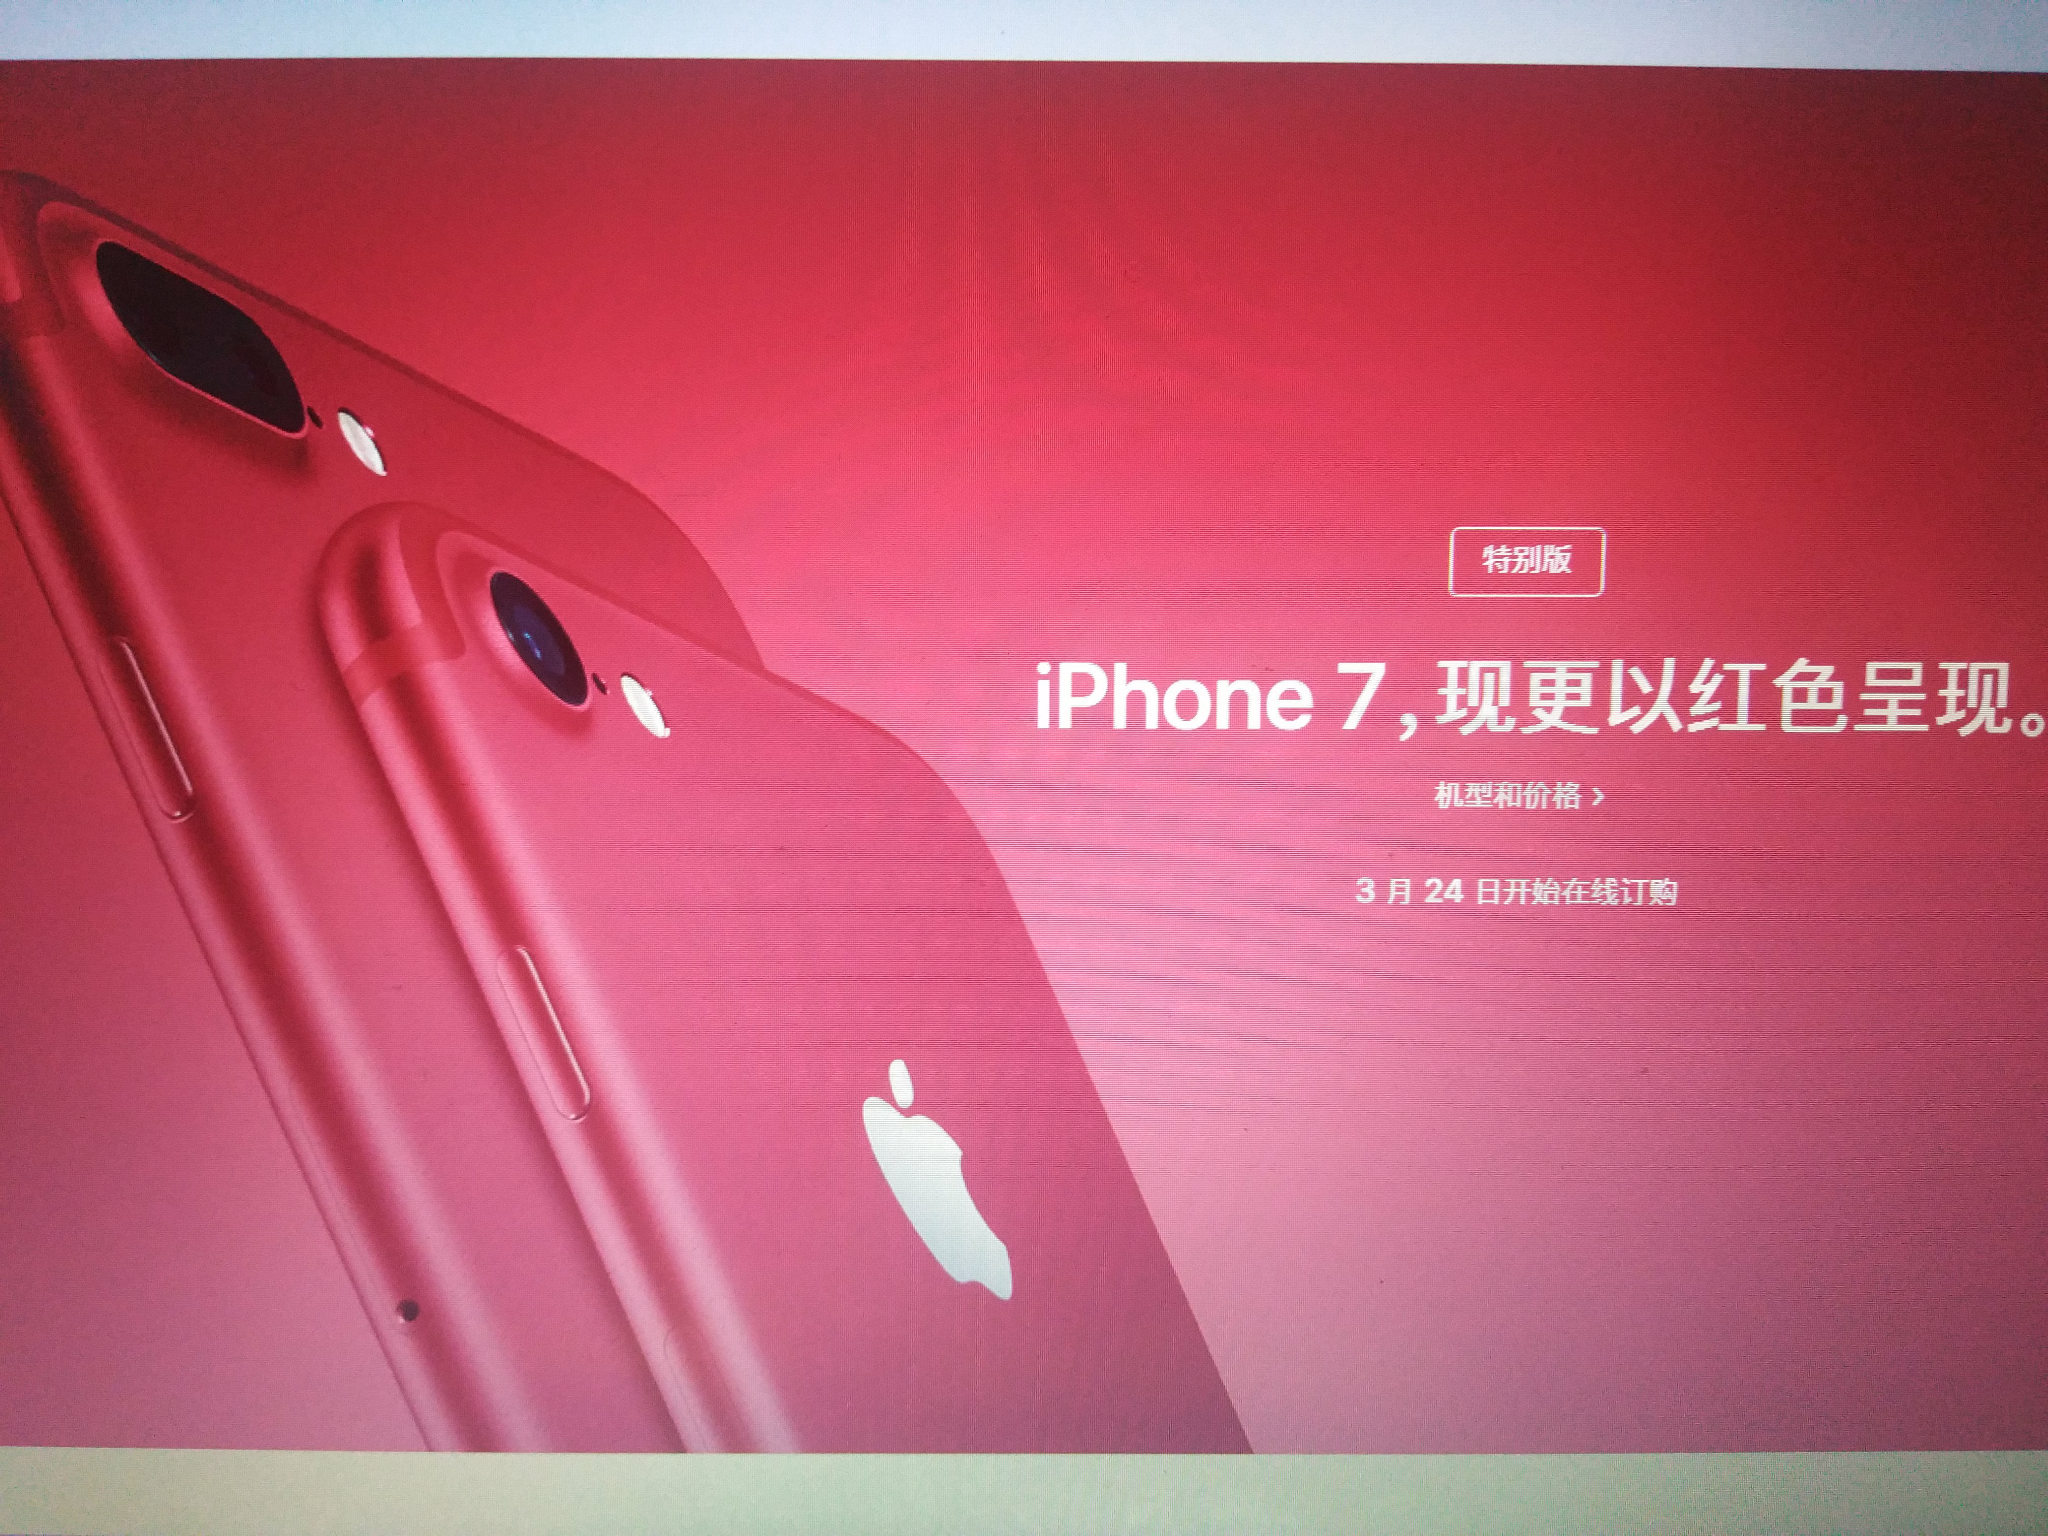 Apple releases red version of iPhone 7 - Business Insider